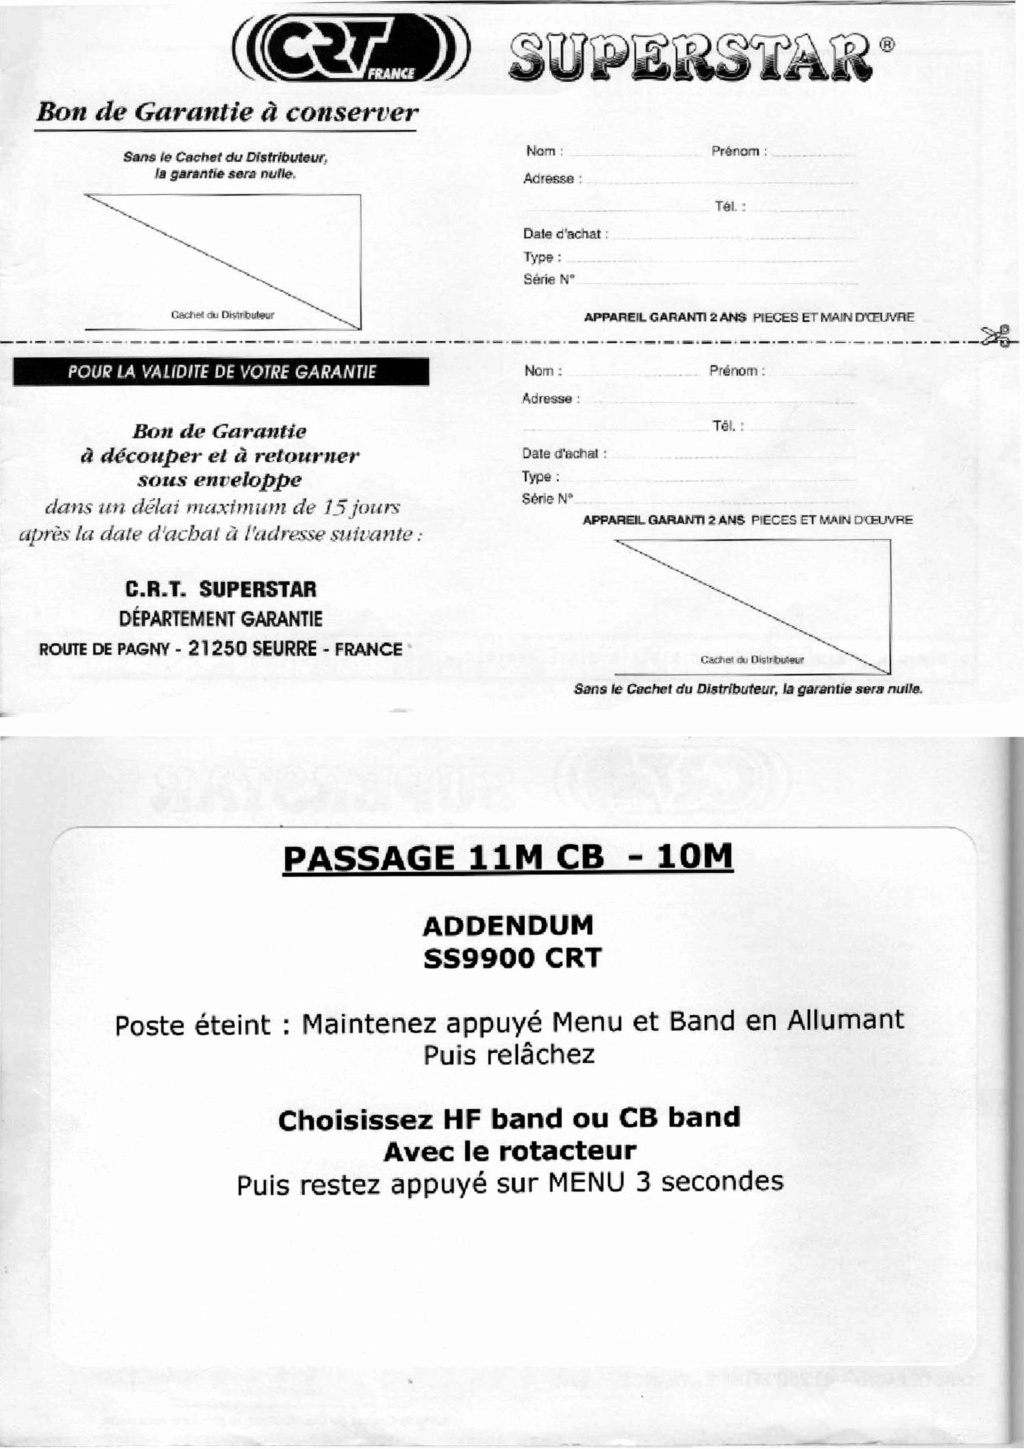 manuel - CRT SS 9900 v4 (Mobile) - Page 14 Feuill24